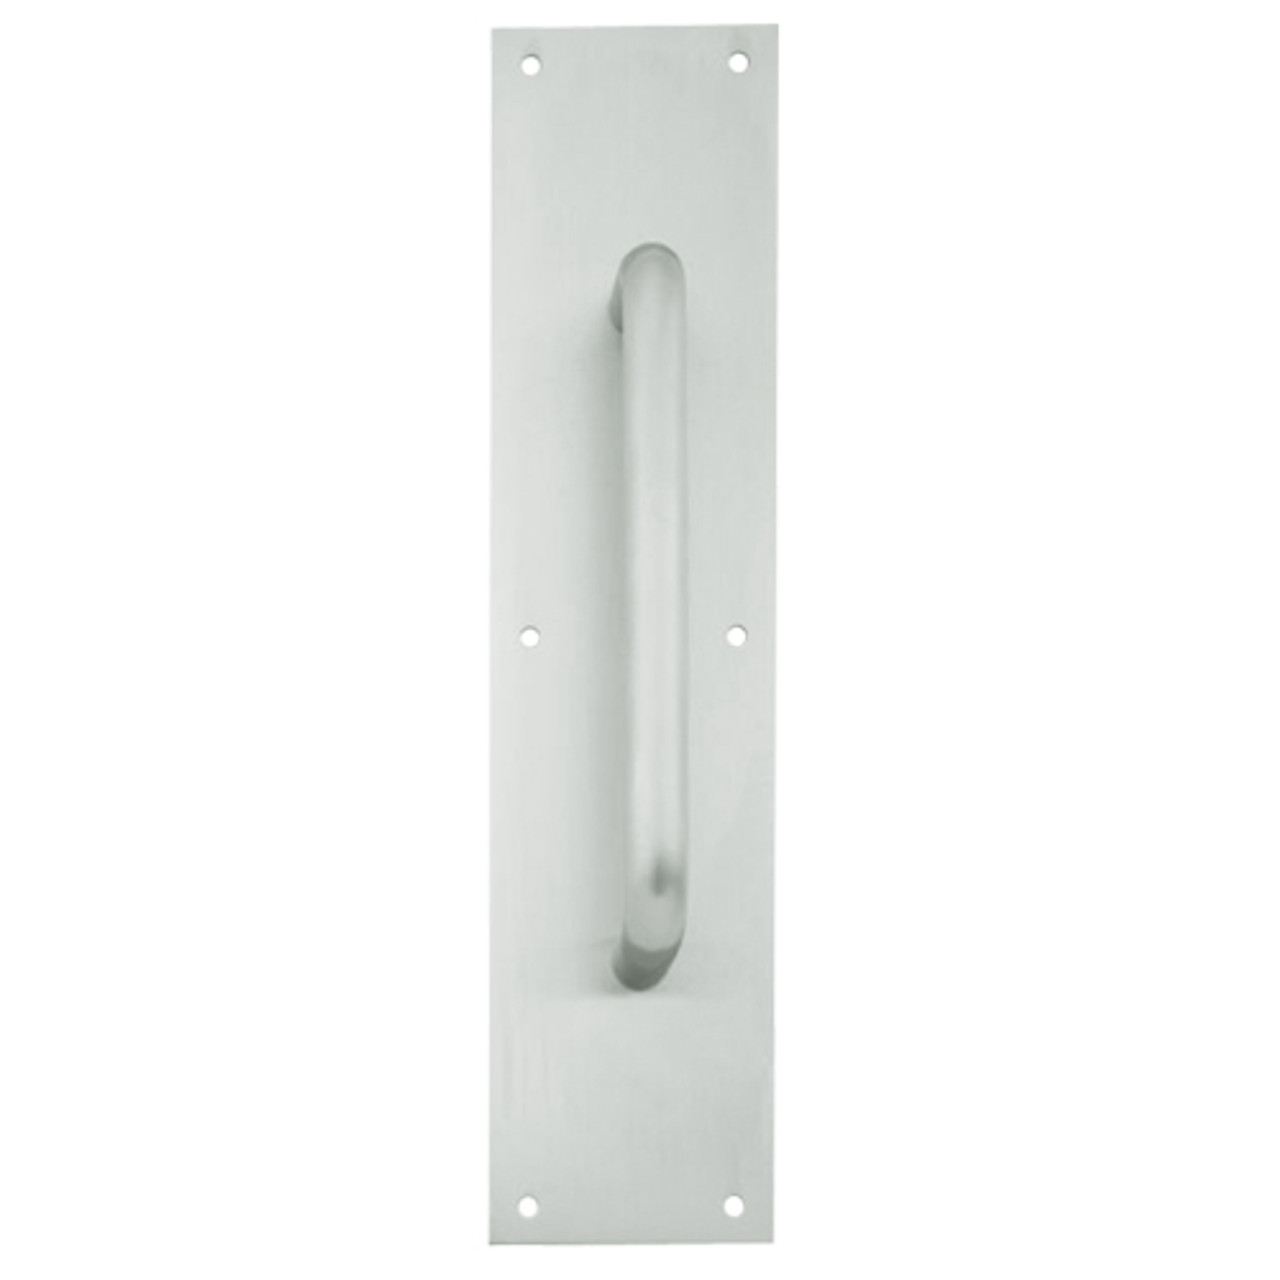 8302-6-US15-3-5x15 IVES Architectural Door Trim 3.5x15 Inch Pull Plate in Satin Nickel